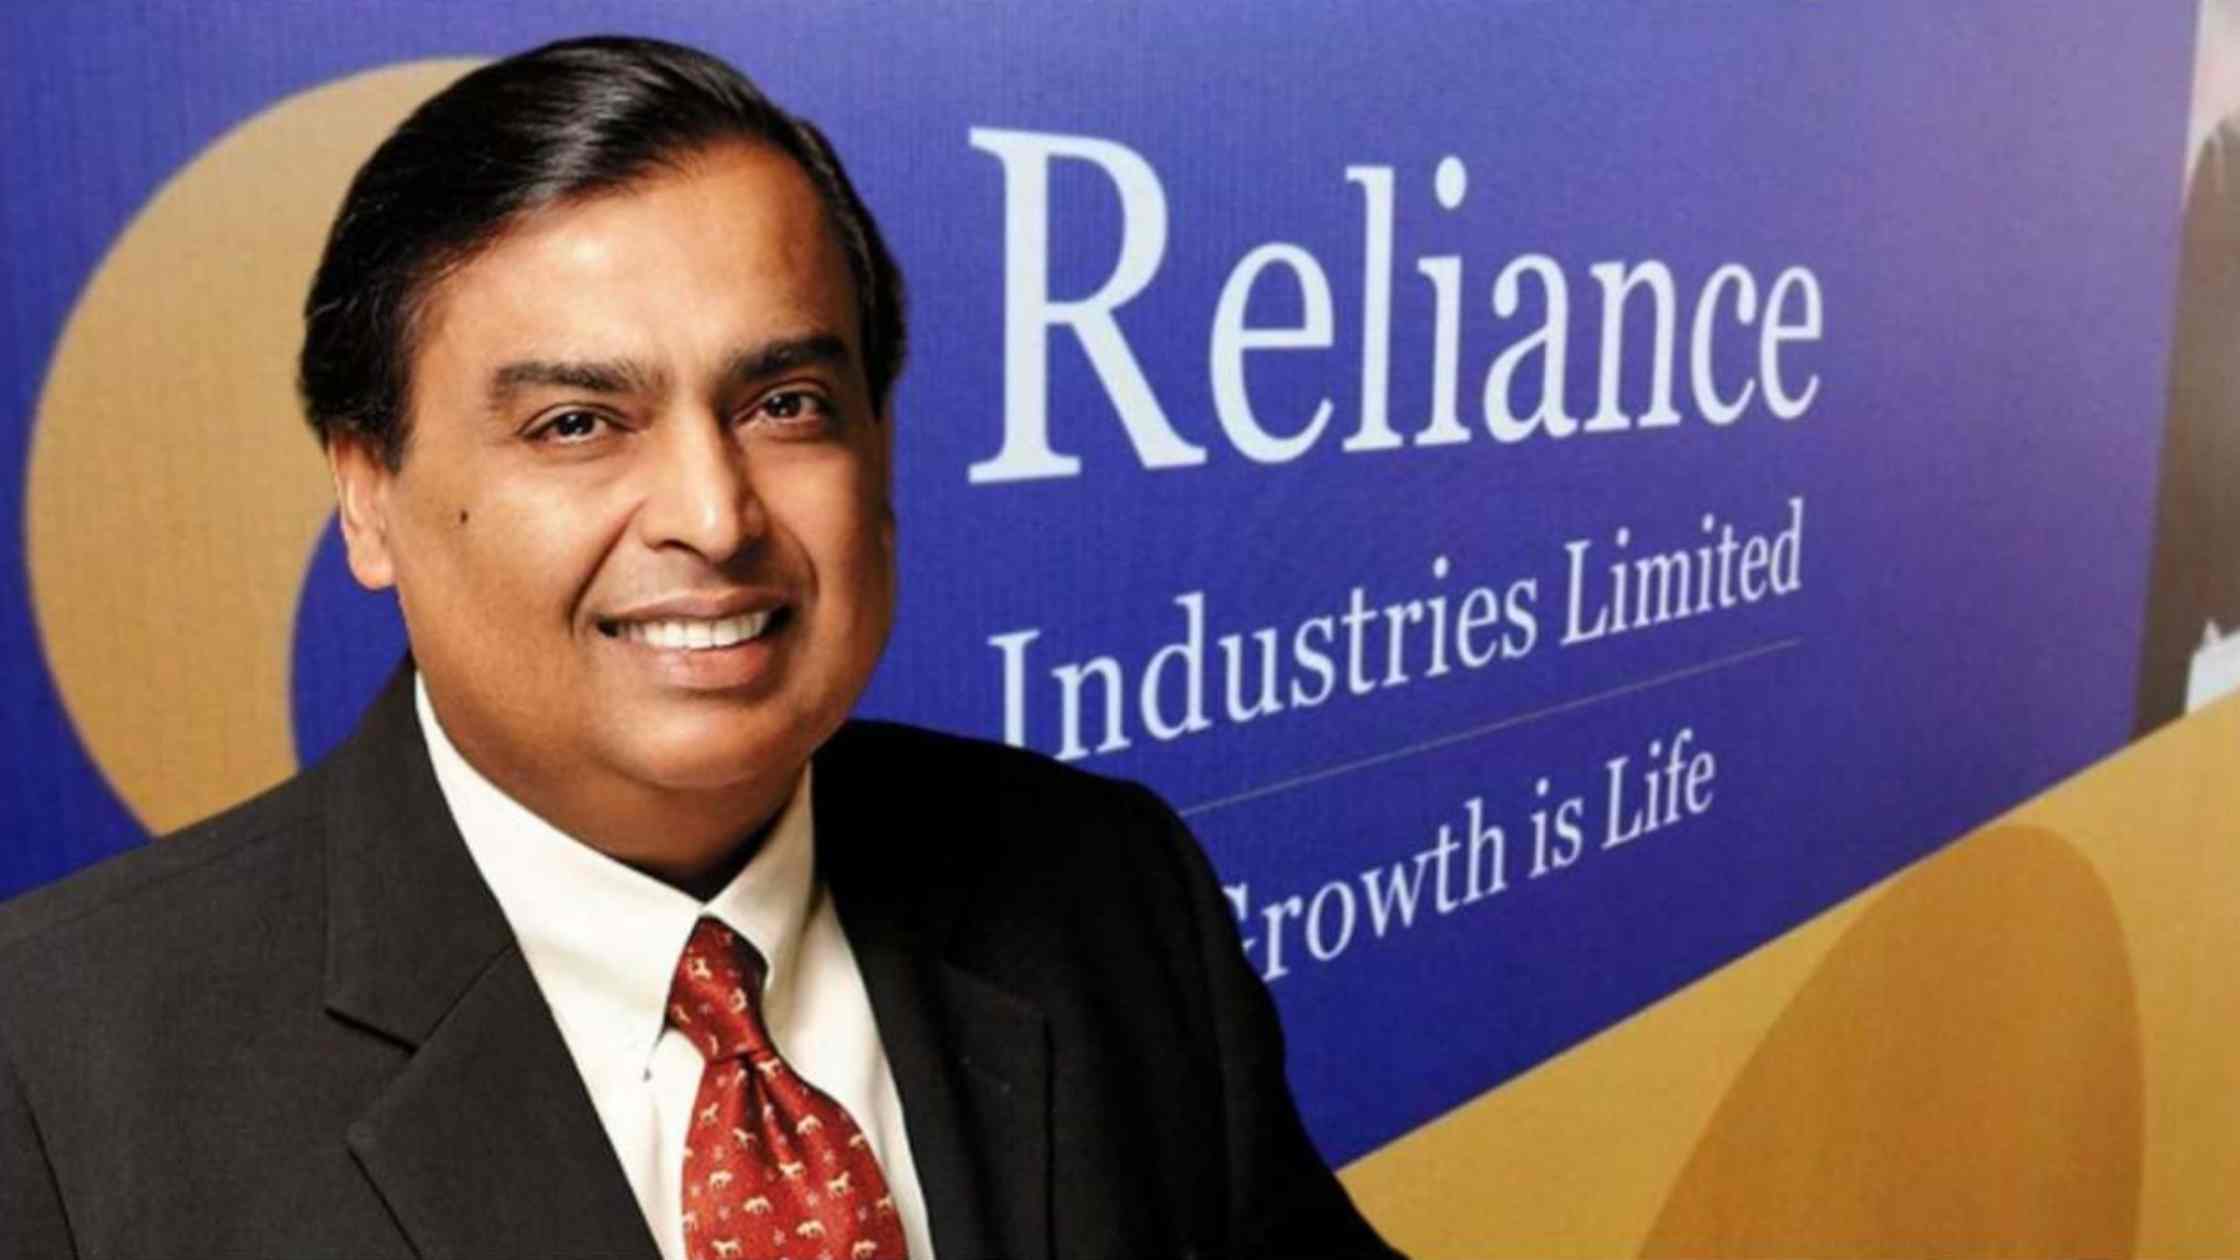 Reliance industry